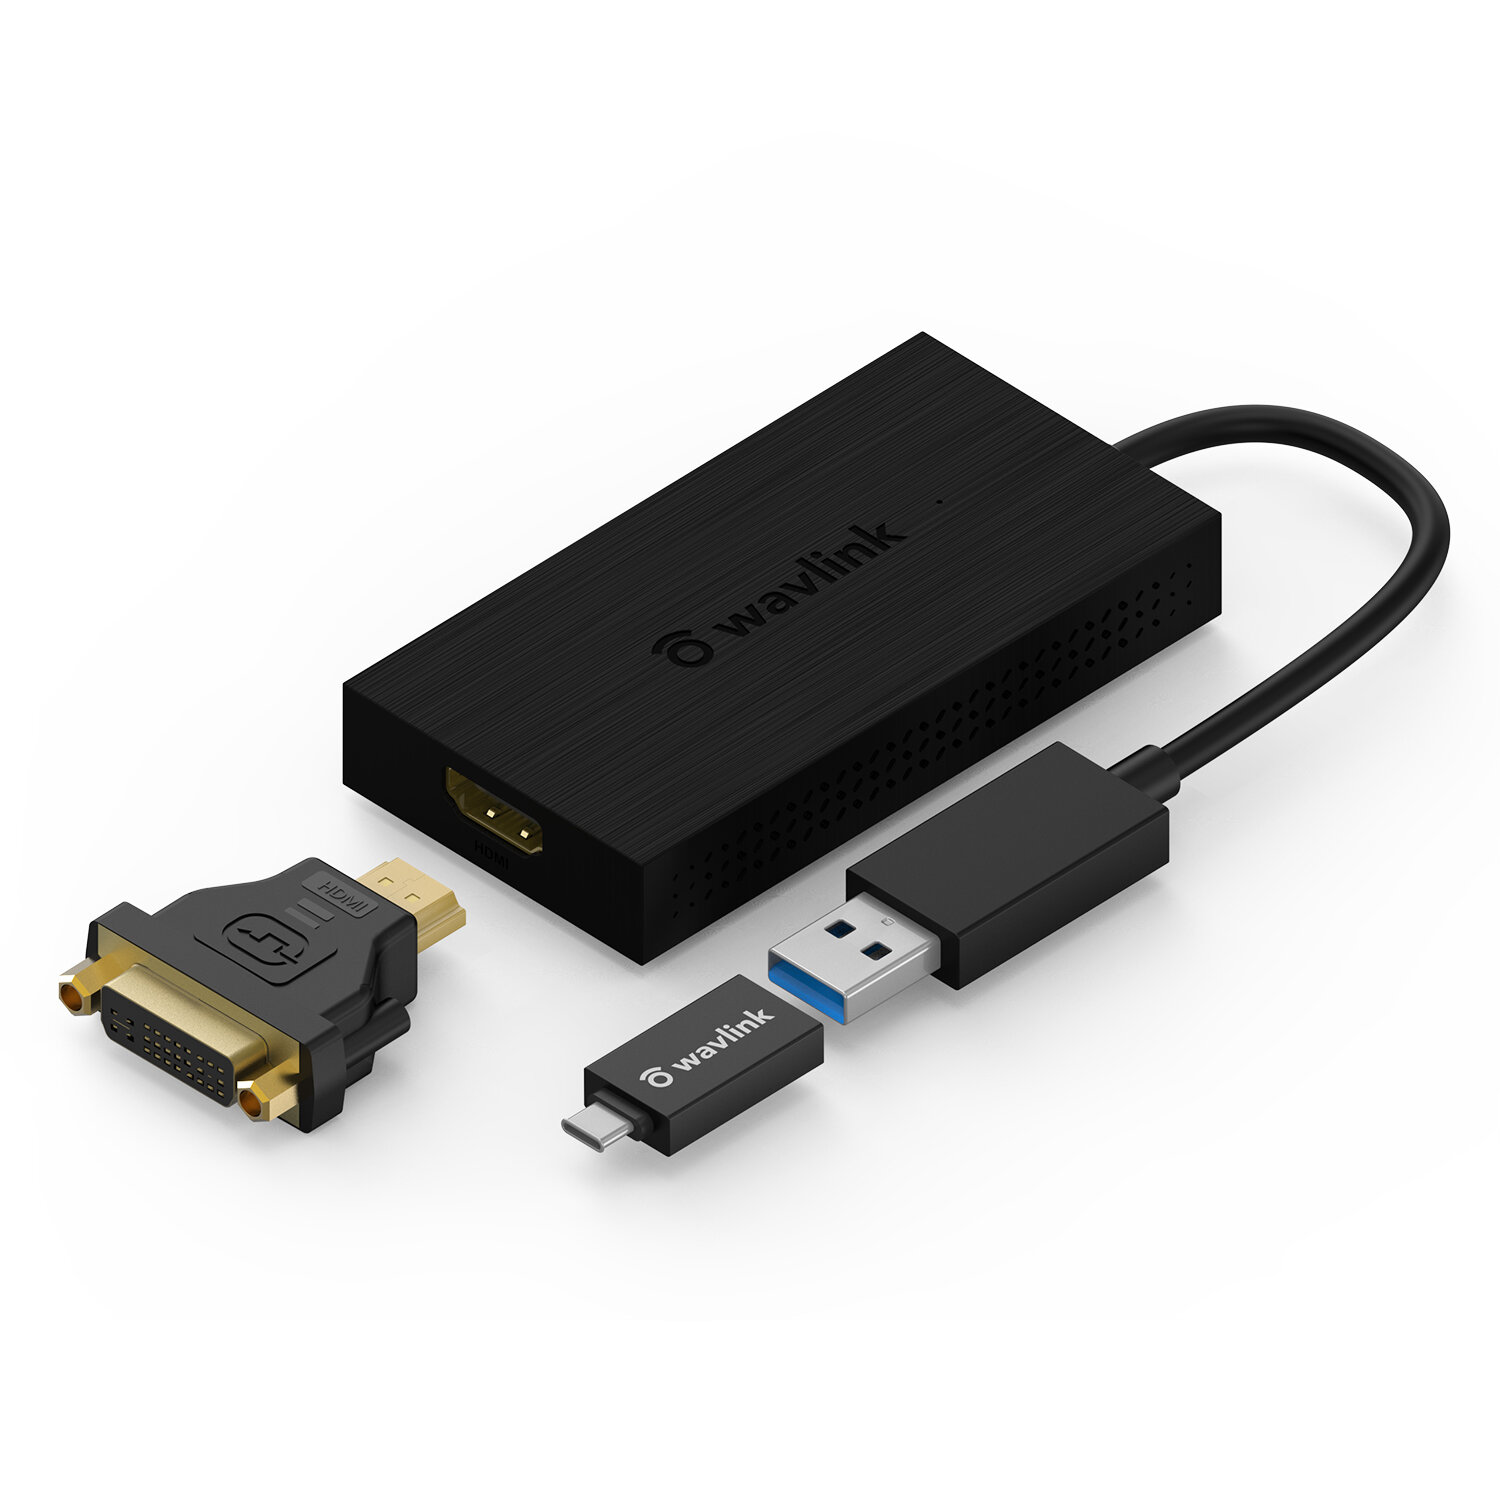 Wavlink USB 3.0 to HDMI 4K Display Adapter Supports up to 6 Monitor displays, 3840 X 2160 External V